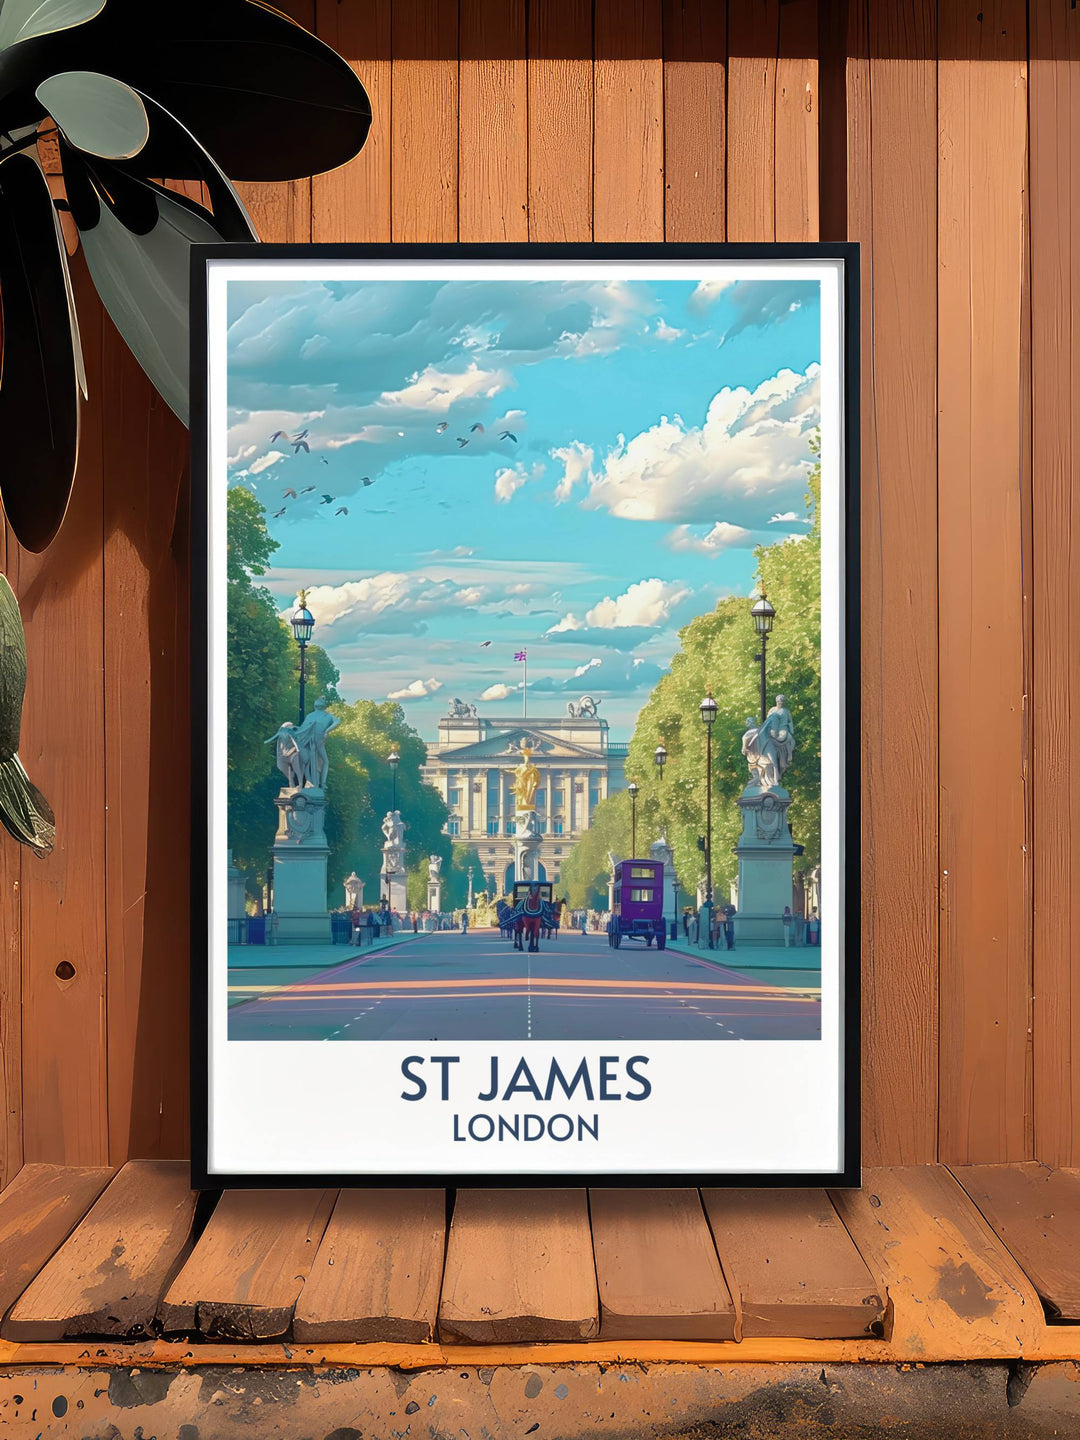 The tranquil footbridges and lush gardens of St Jamess Park captured in a detailed and vibrant travel poster.